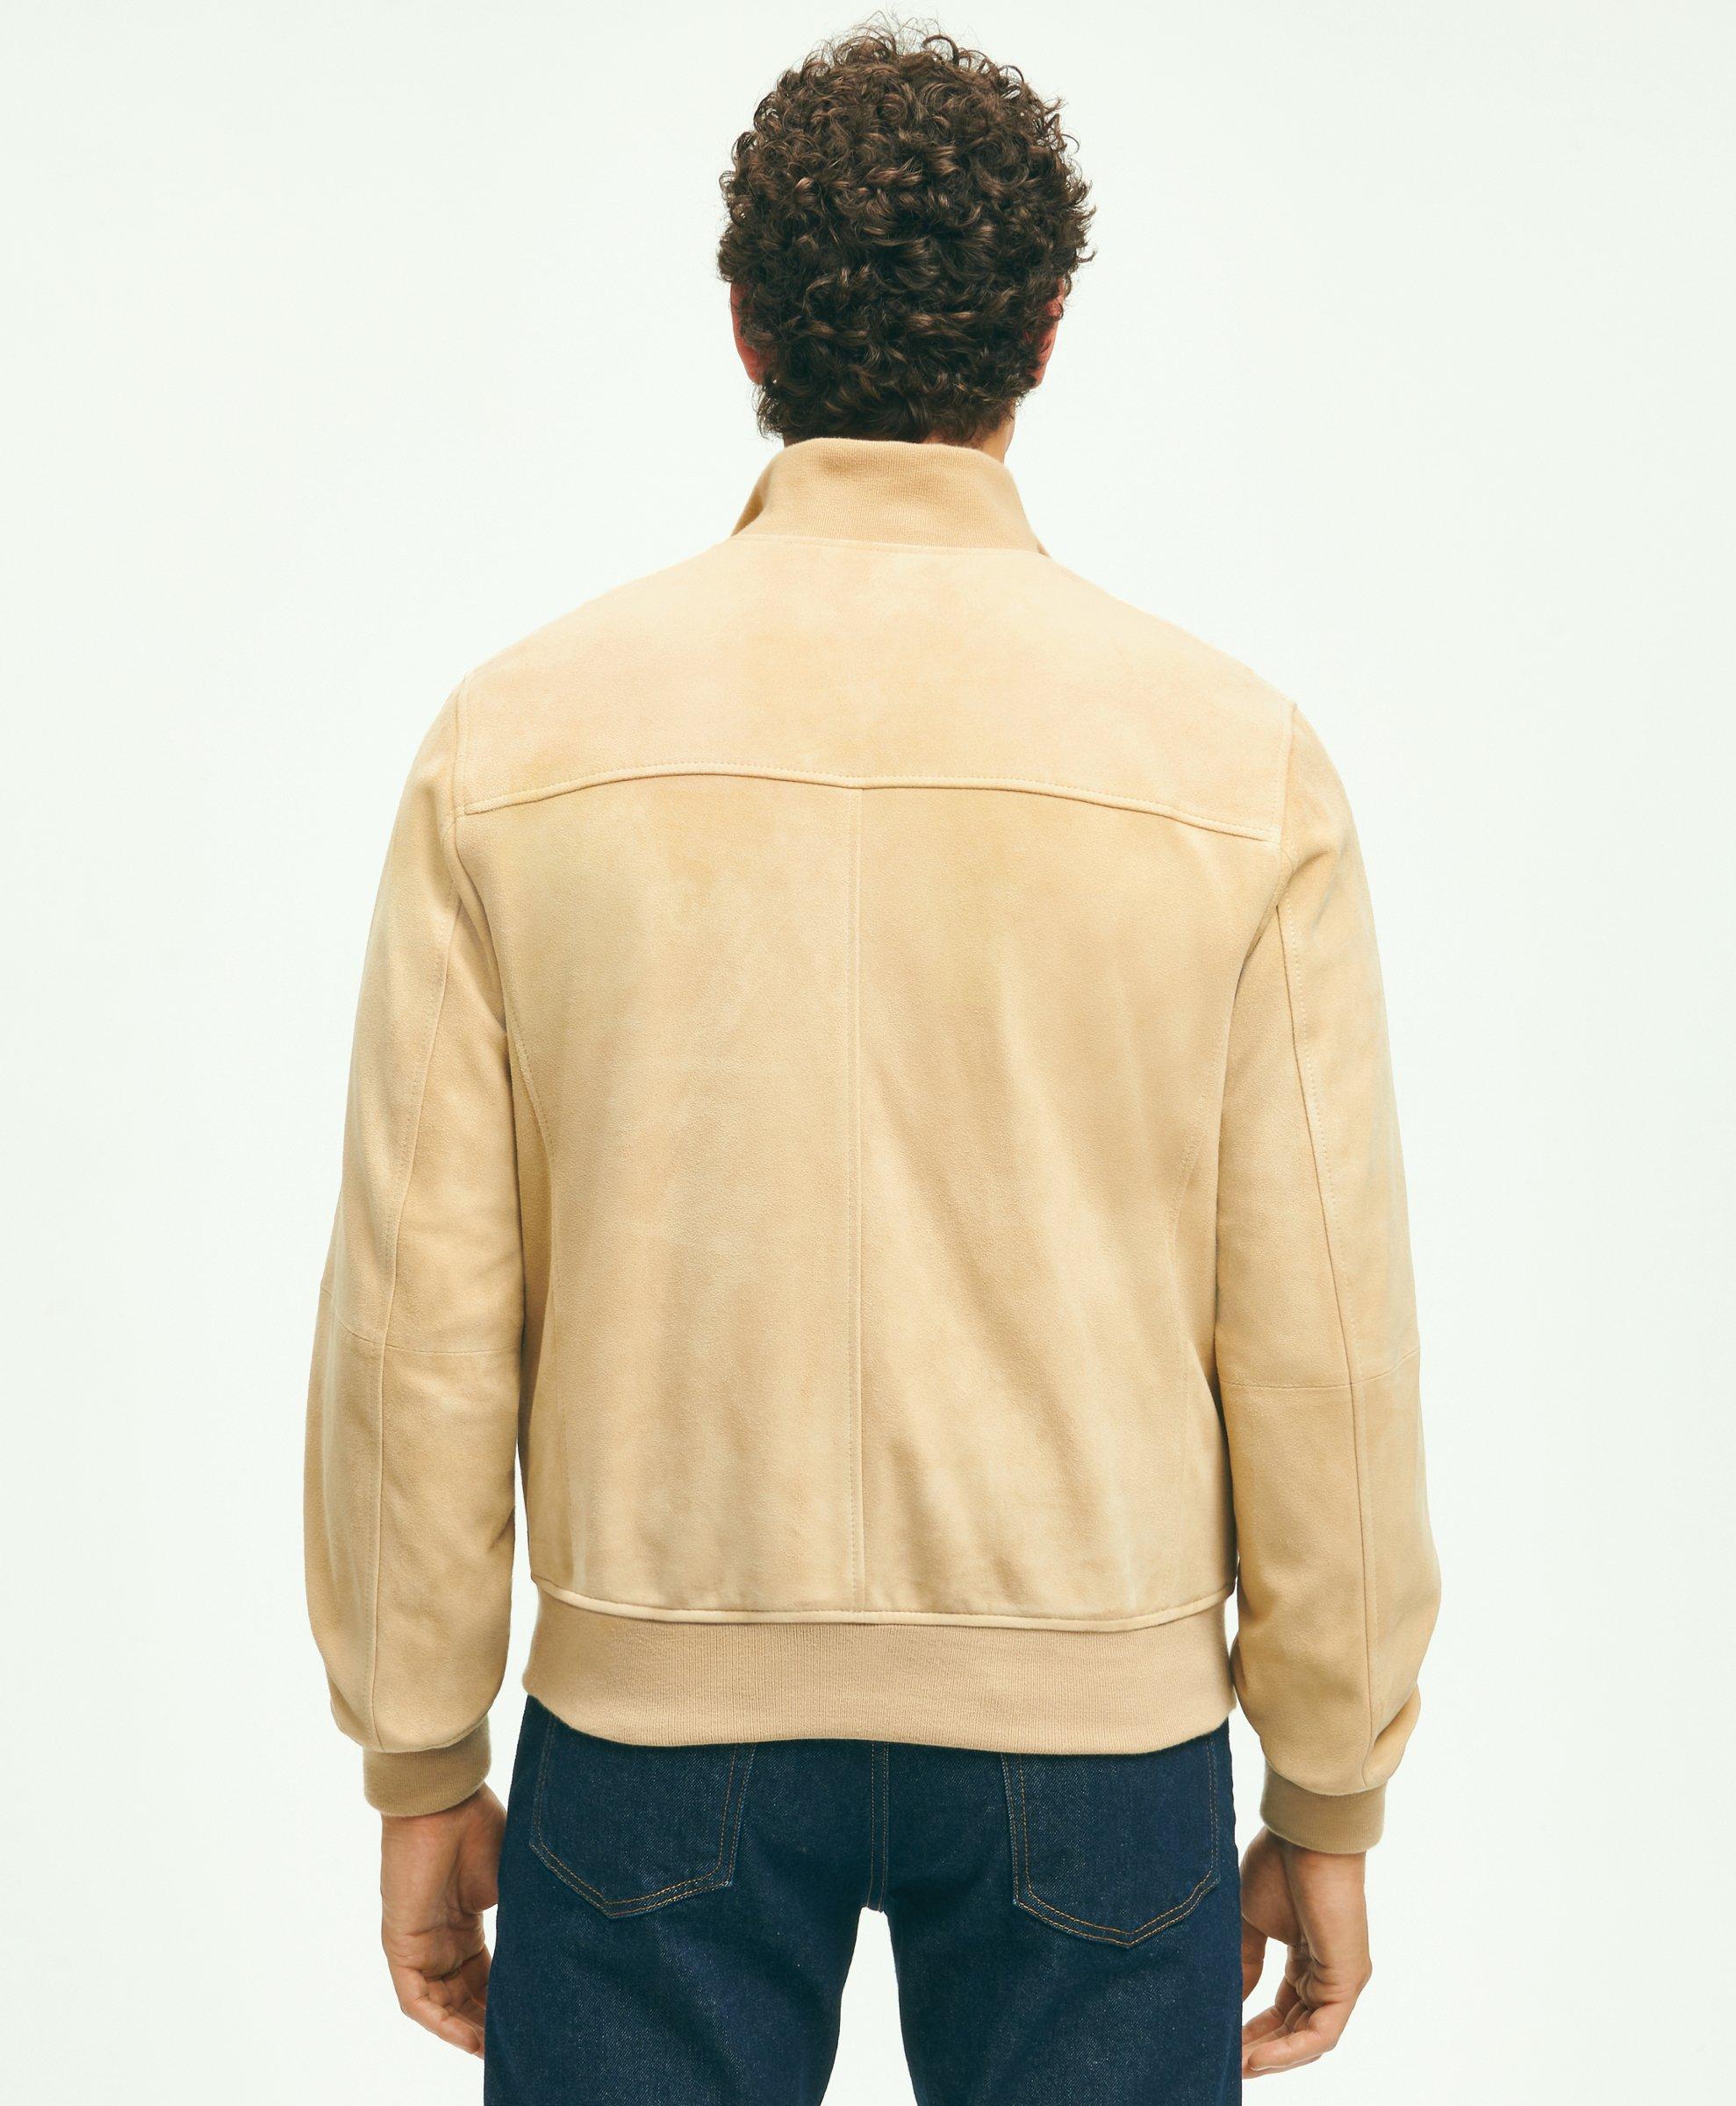 Men's Tan Leather Suede Bomber Jacket